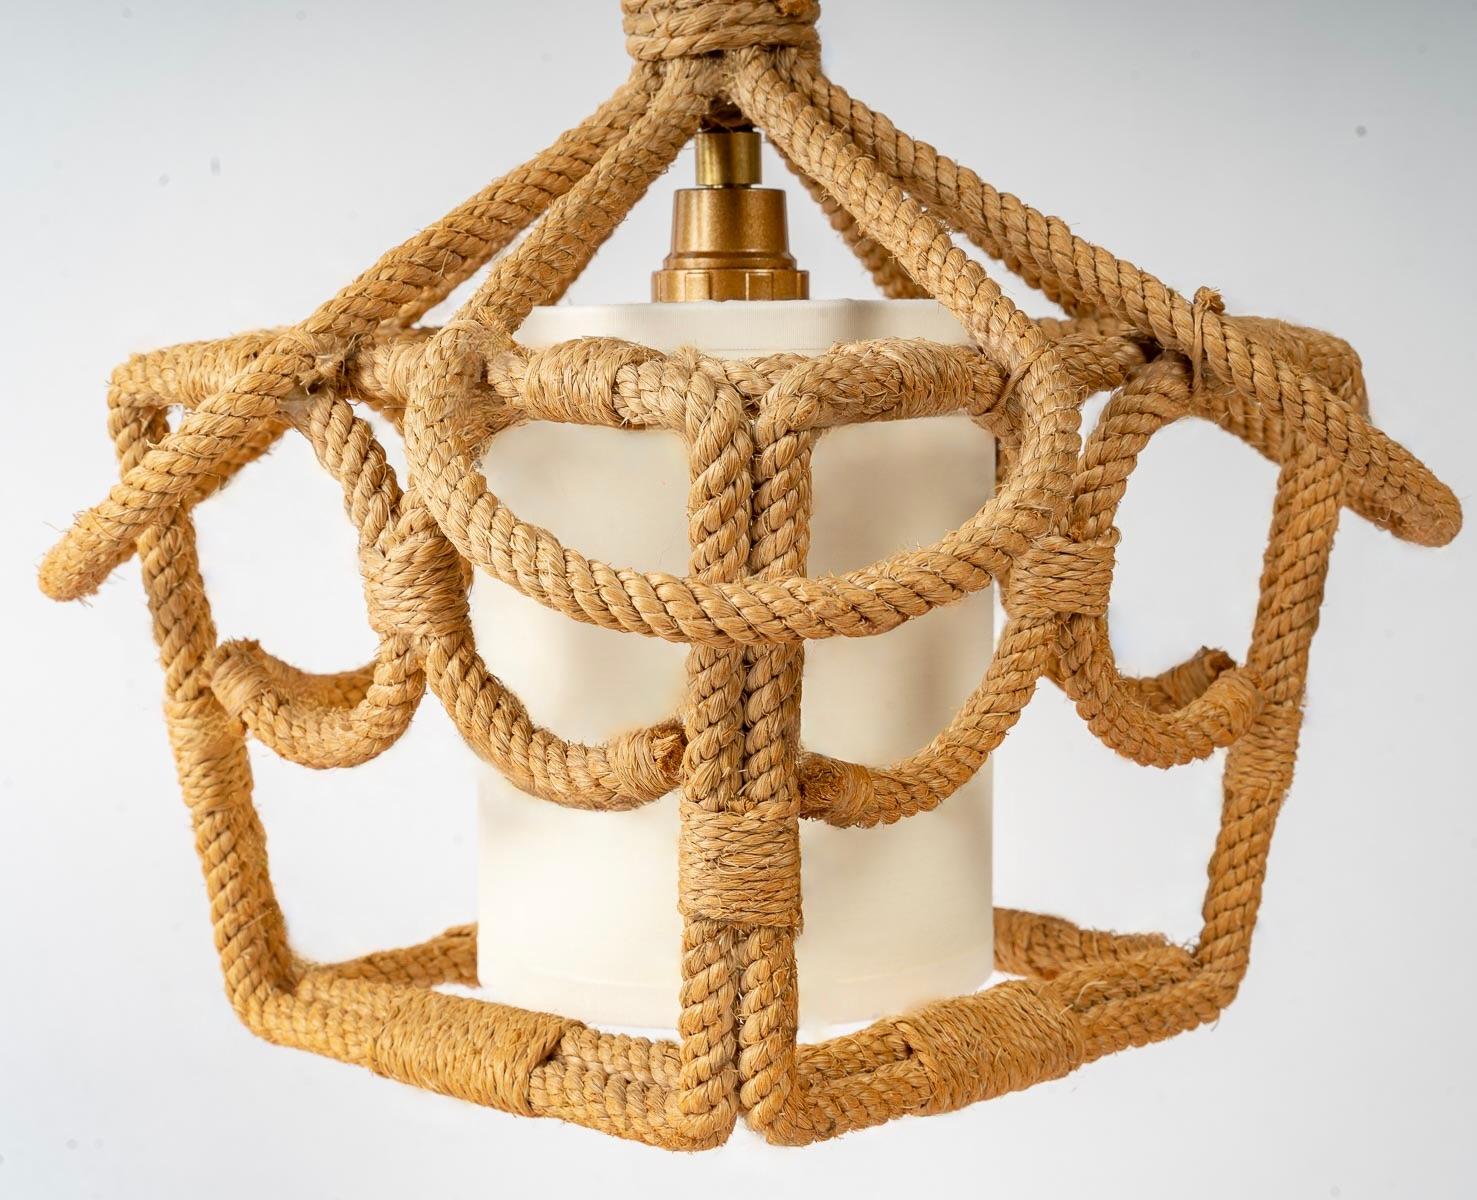 Composed of a lantern of square section in rope decorated with winding of rope inside the faces and on underlined on the high part of four winding joining in the center and assembled by a wire of rope.
Above is the rod in rope formed of several